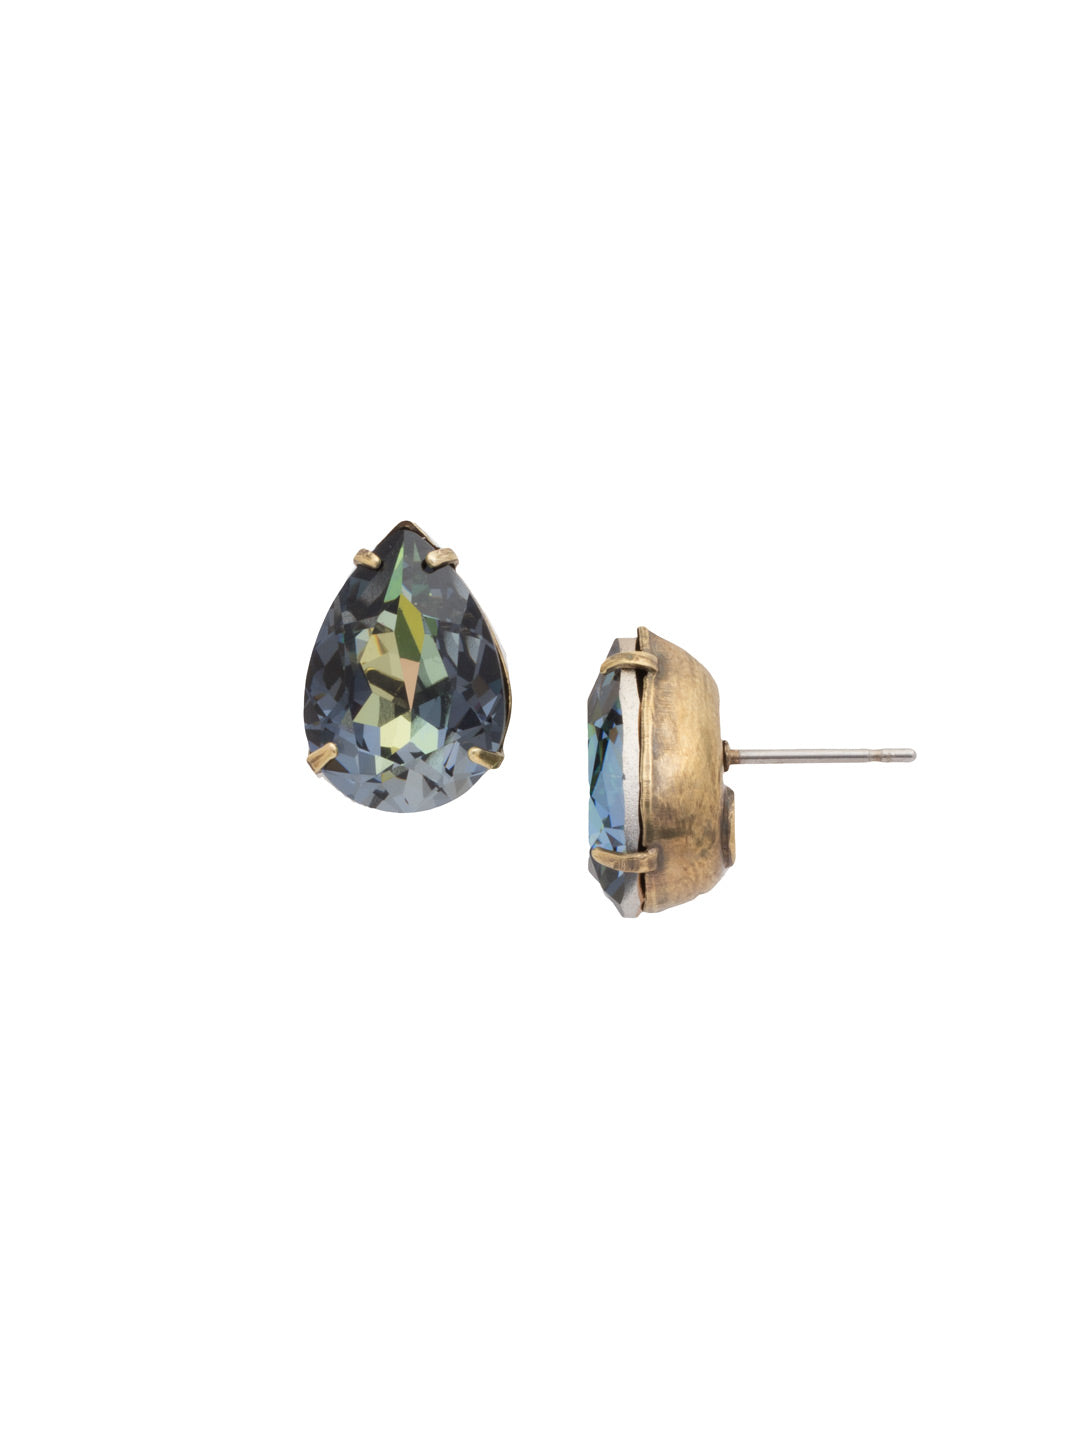 Ginnie Stud Earrings - ECR115AGCRP - <p>A beautiful basic stud. These classic single teardrop post earrings are perfect for any occasion, especially the everyday look. A timeless treasure that will sparkle season after season. From Sorrelli's Crystal Patina collection in our Antique Gold-tone finish.</p>